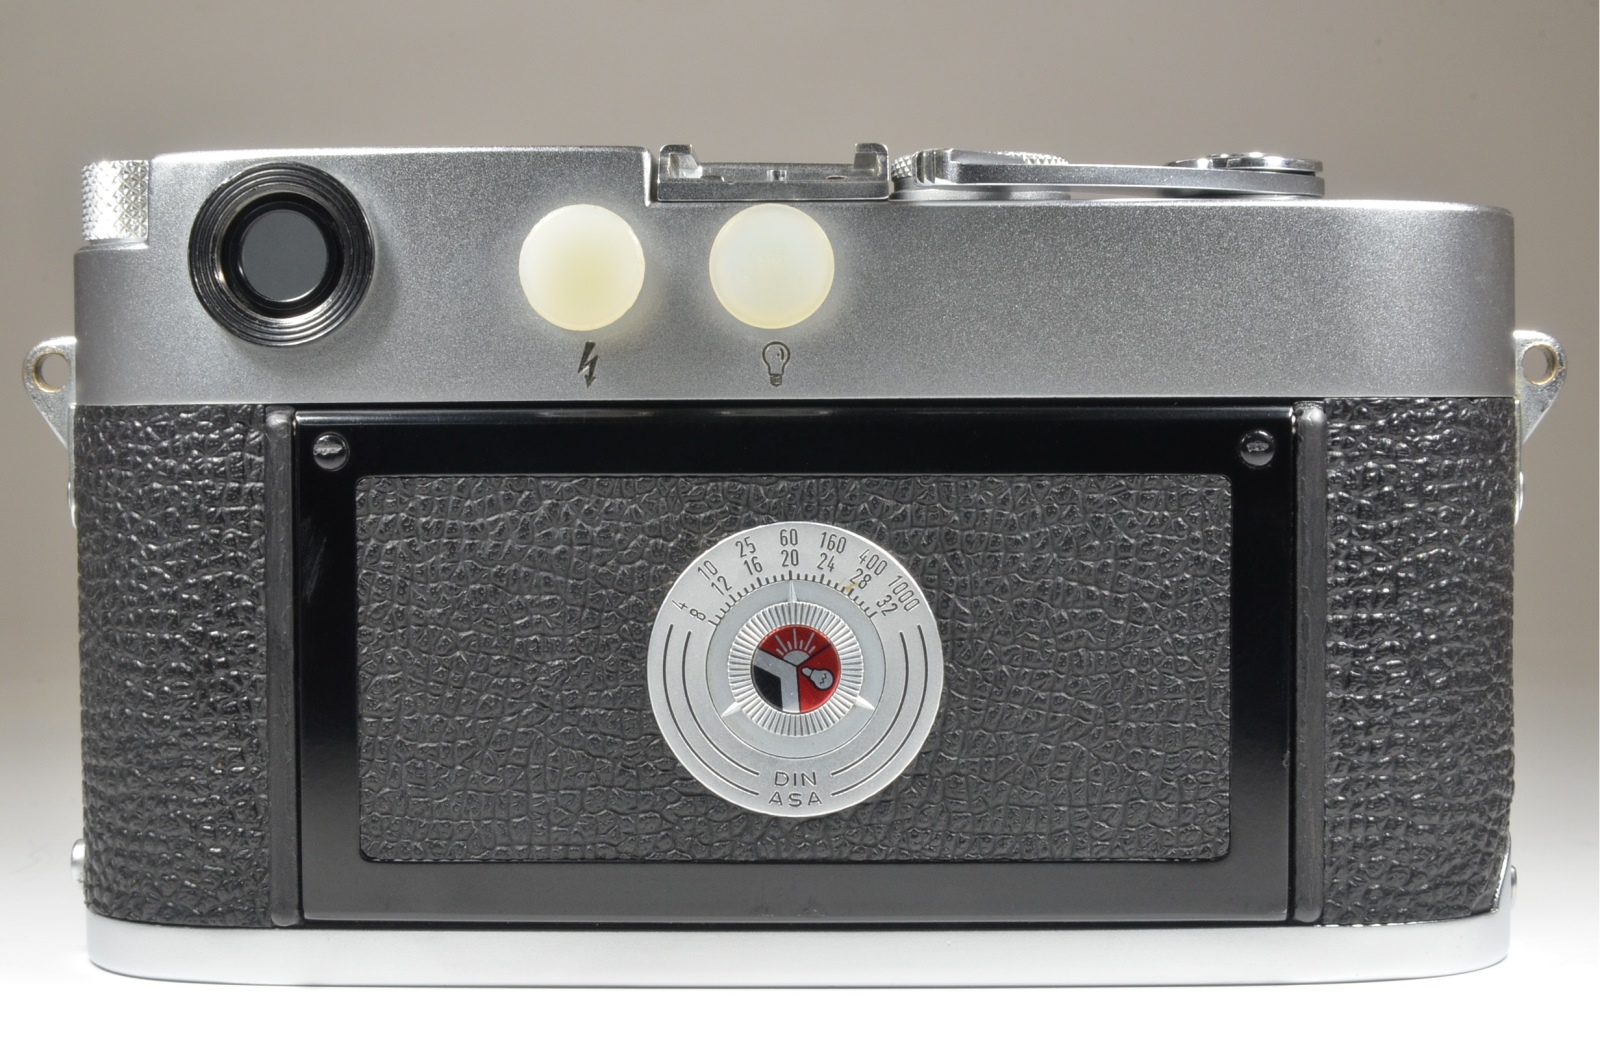 leica m3 double stroke s/n 886839 year 1957 with strap